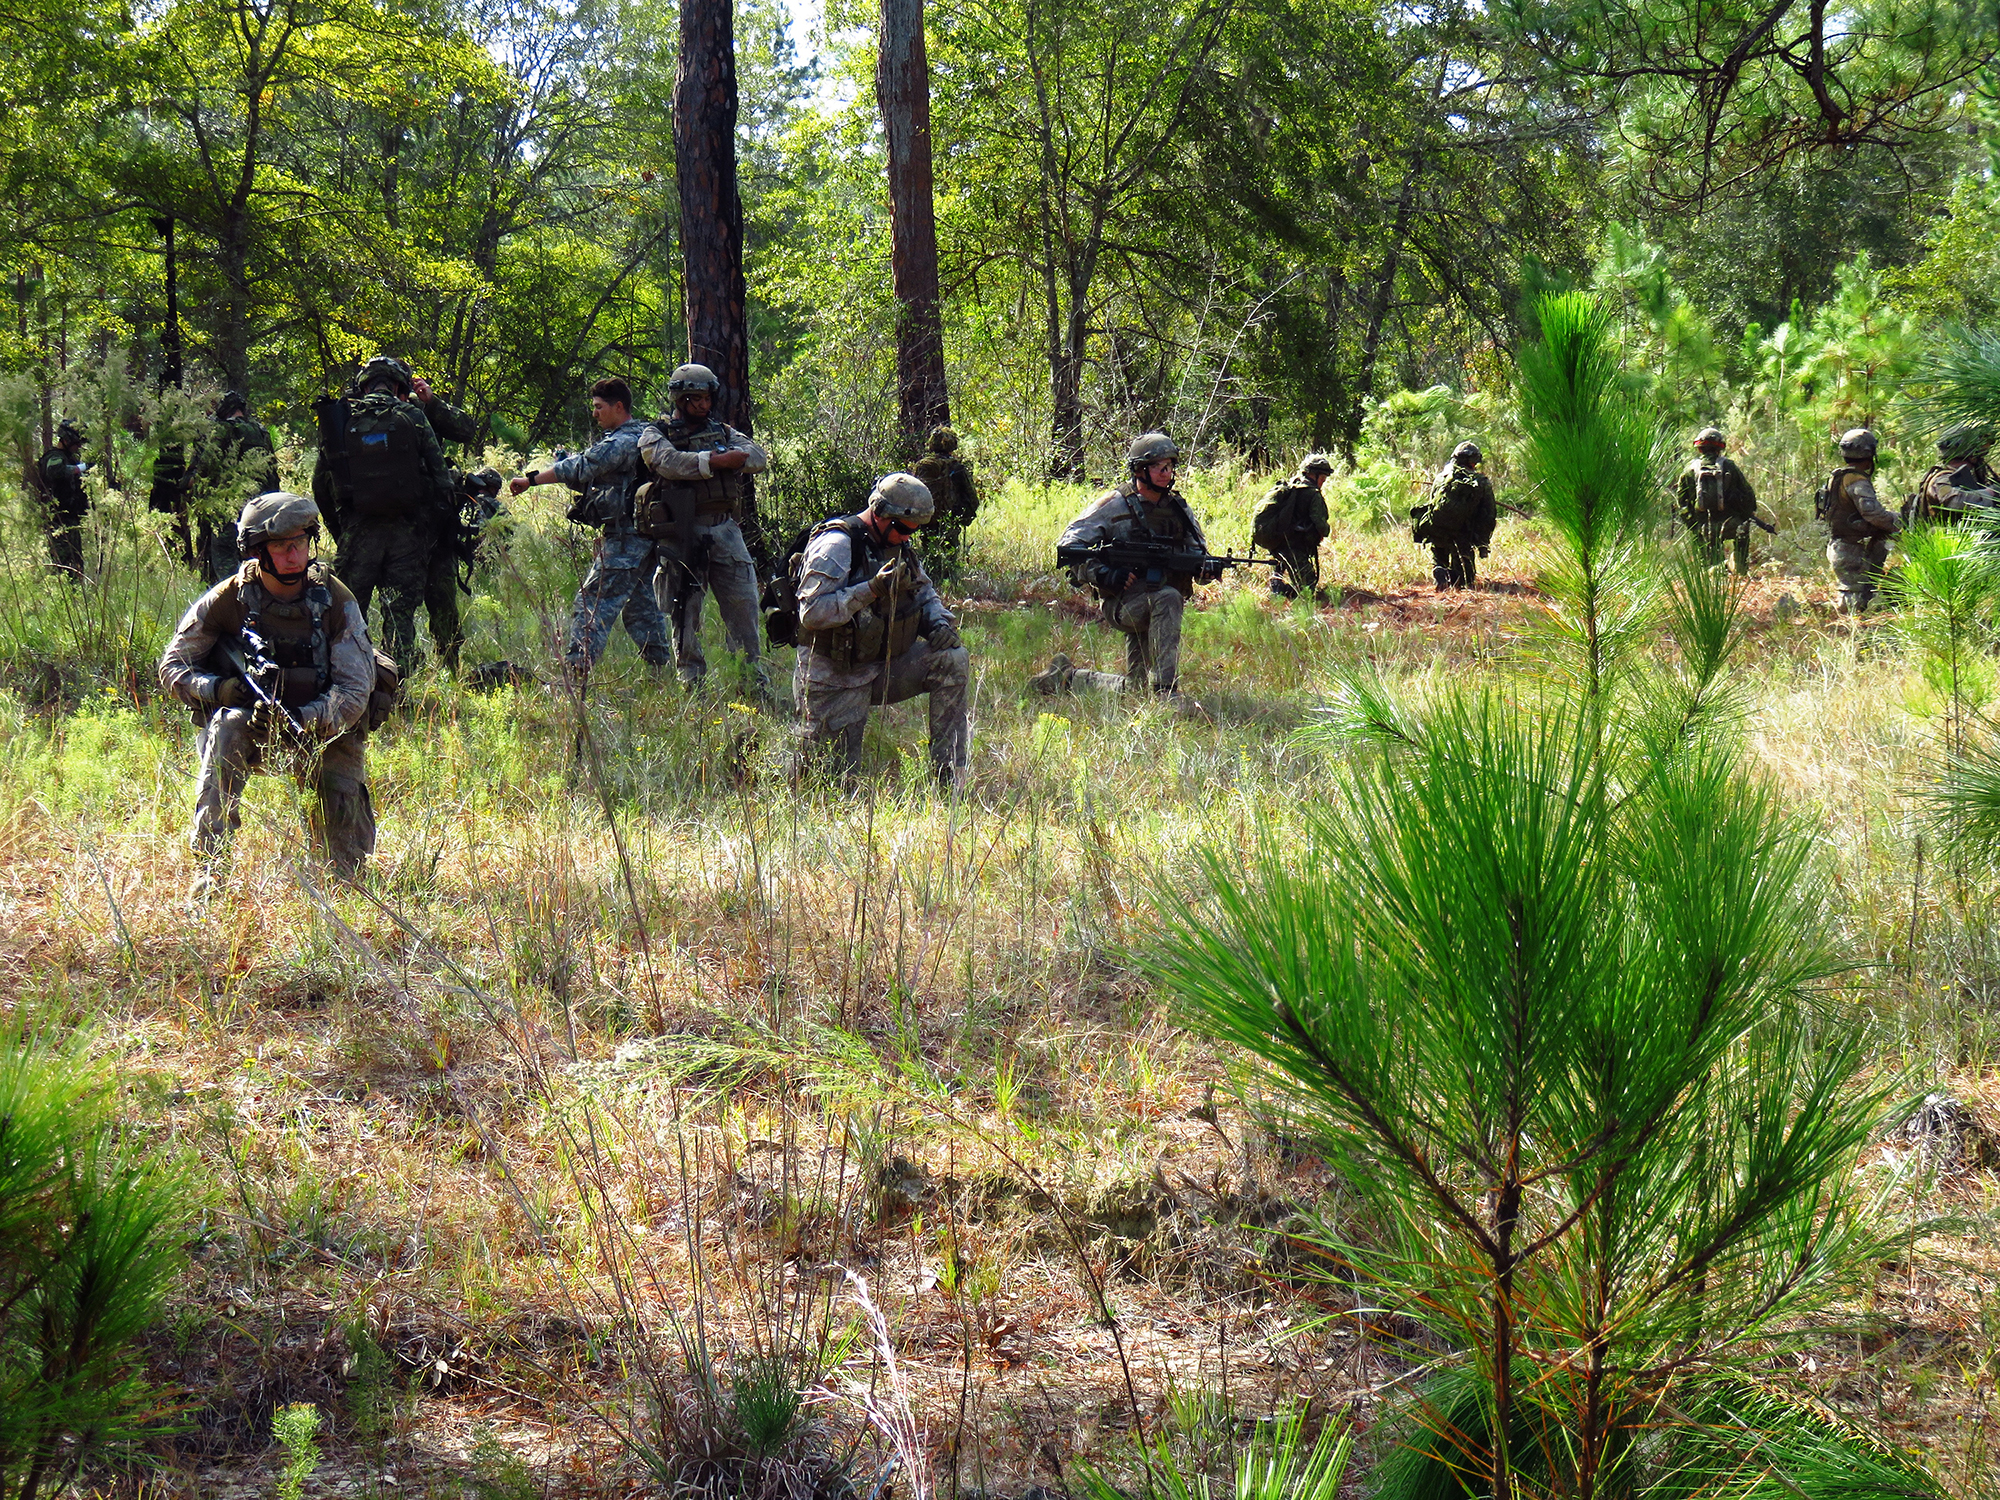 A mixed platoon of Canadian and New Zealand soldiers participating in the U.S. Joint Staff-led Exercise BOLD QUEST, a demonstration and assessment that took place from October 24 to November 3, 2016 in Fort Stewart, Georgia.